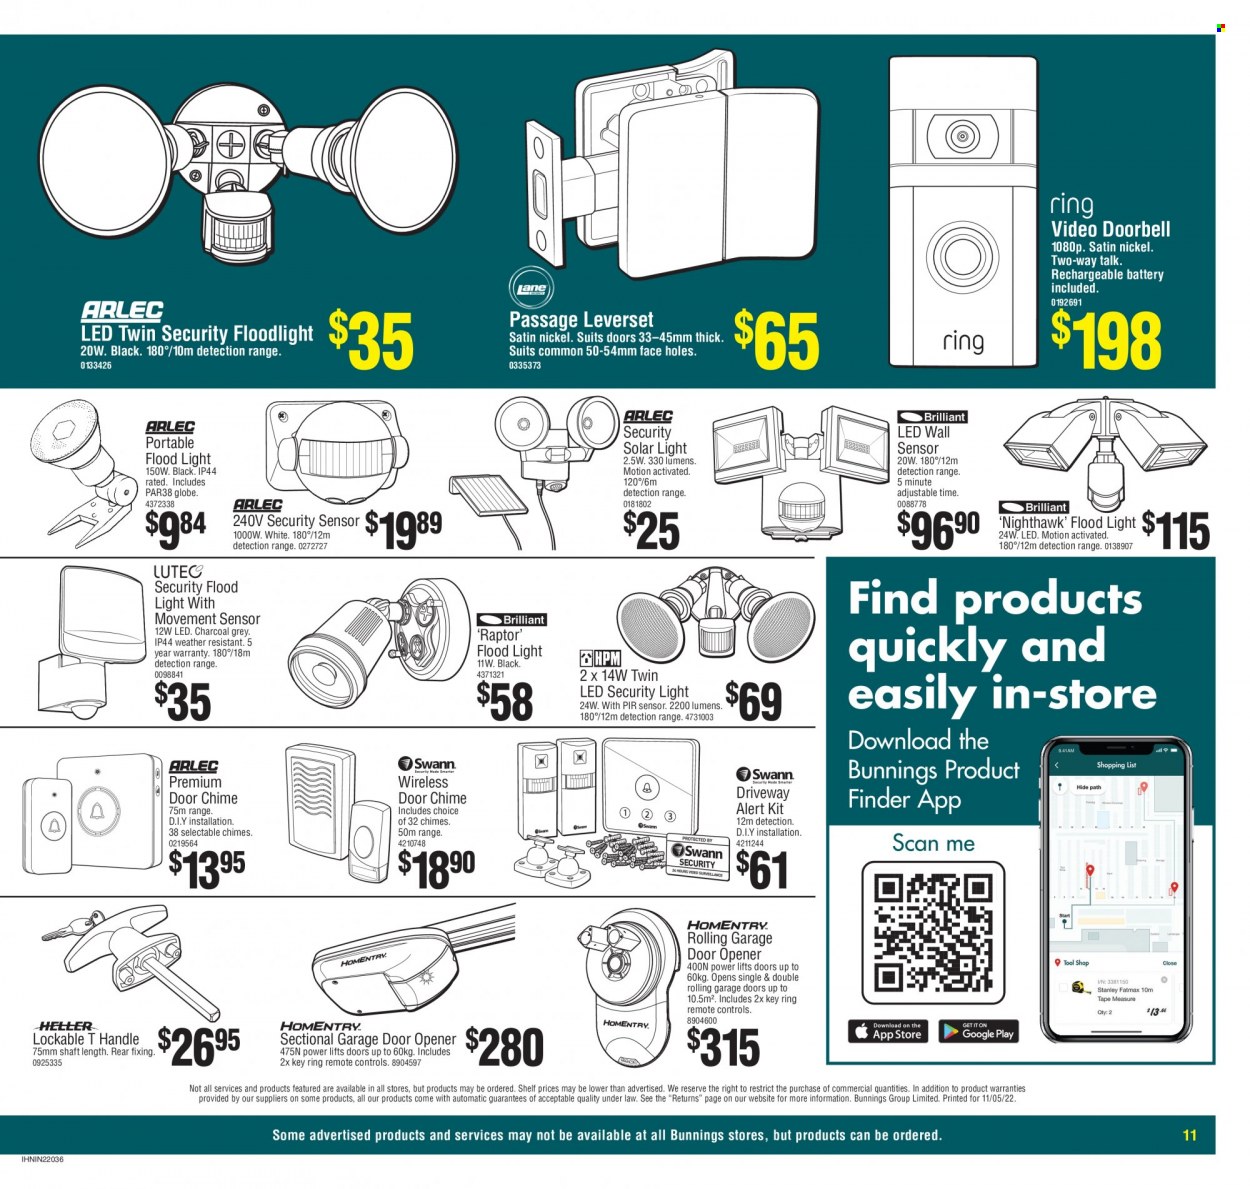 Bunnings Warehouse mailer . Page 11.